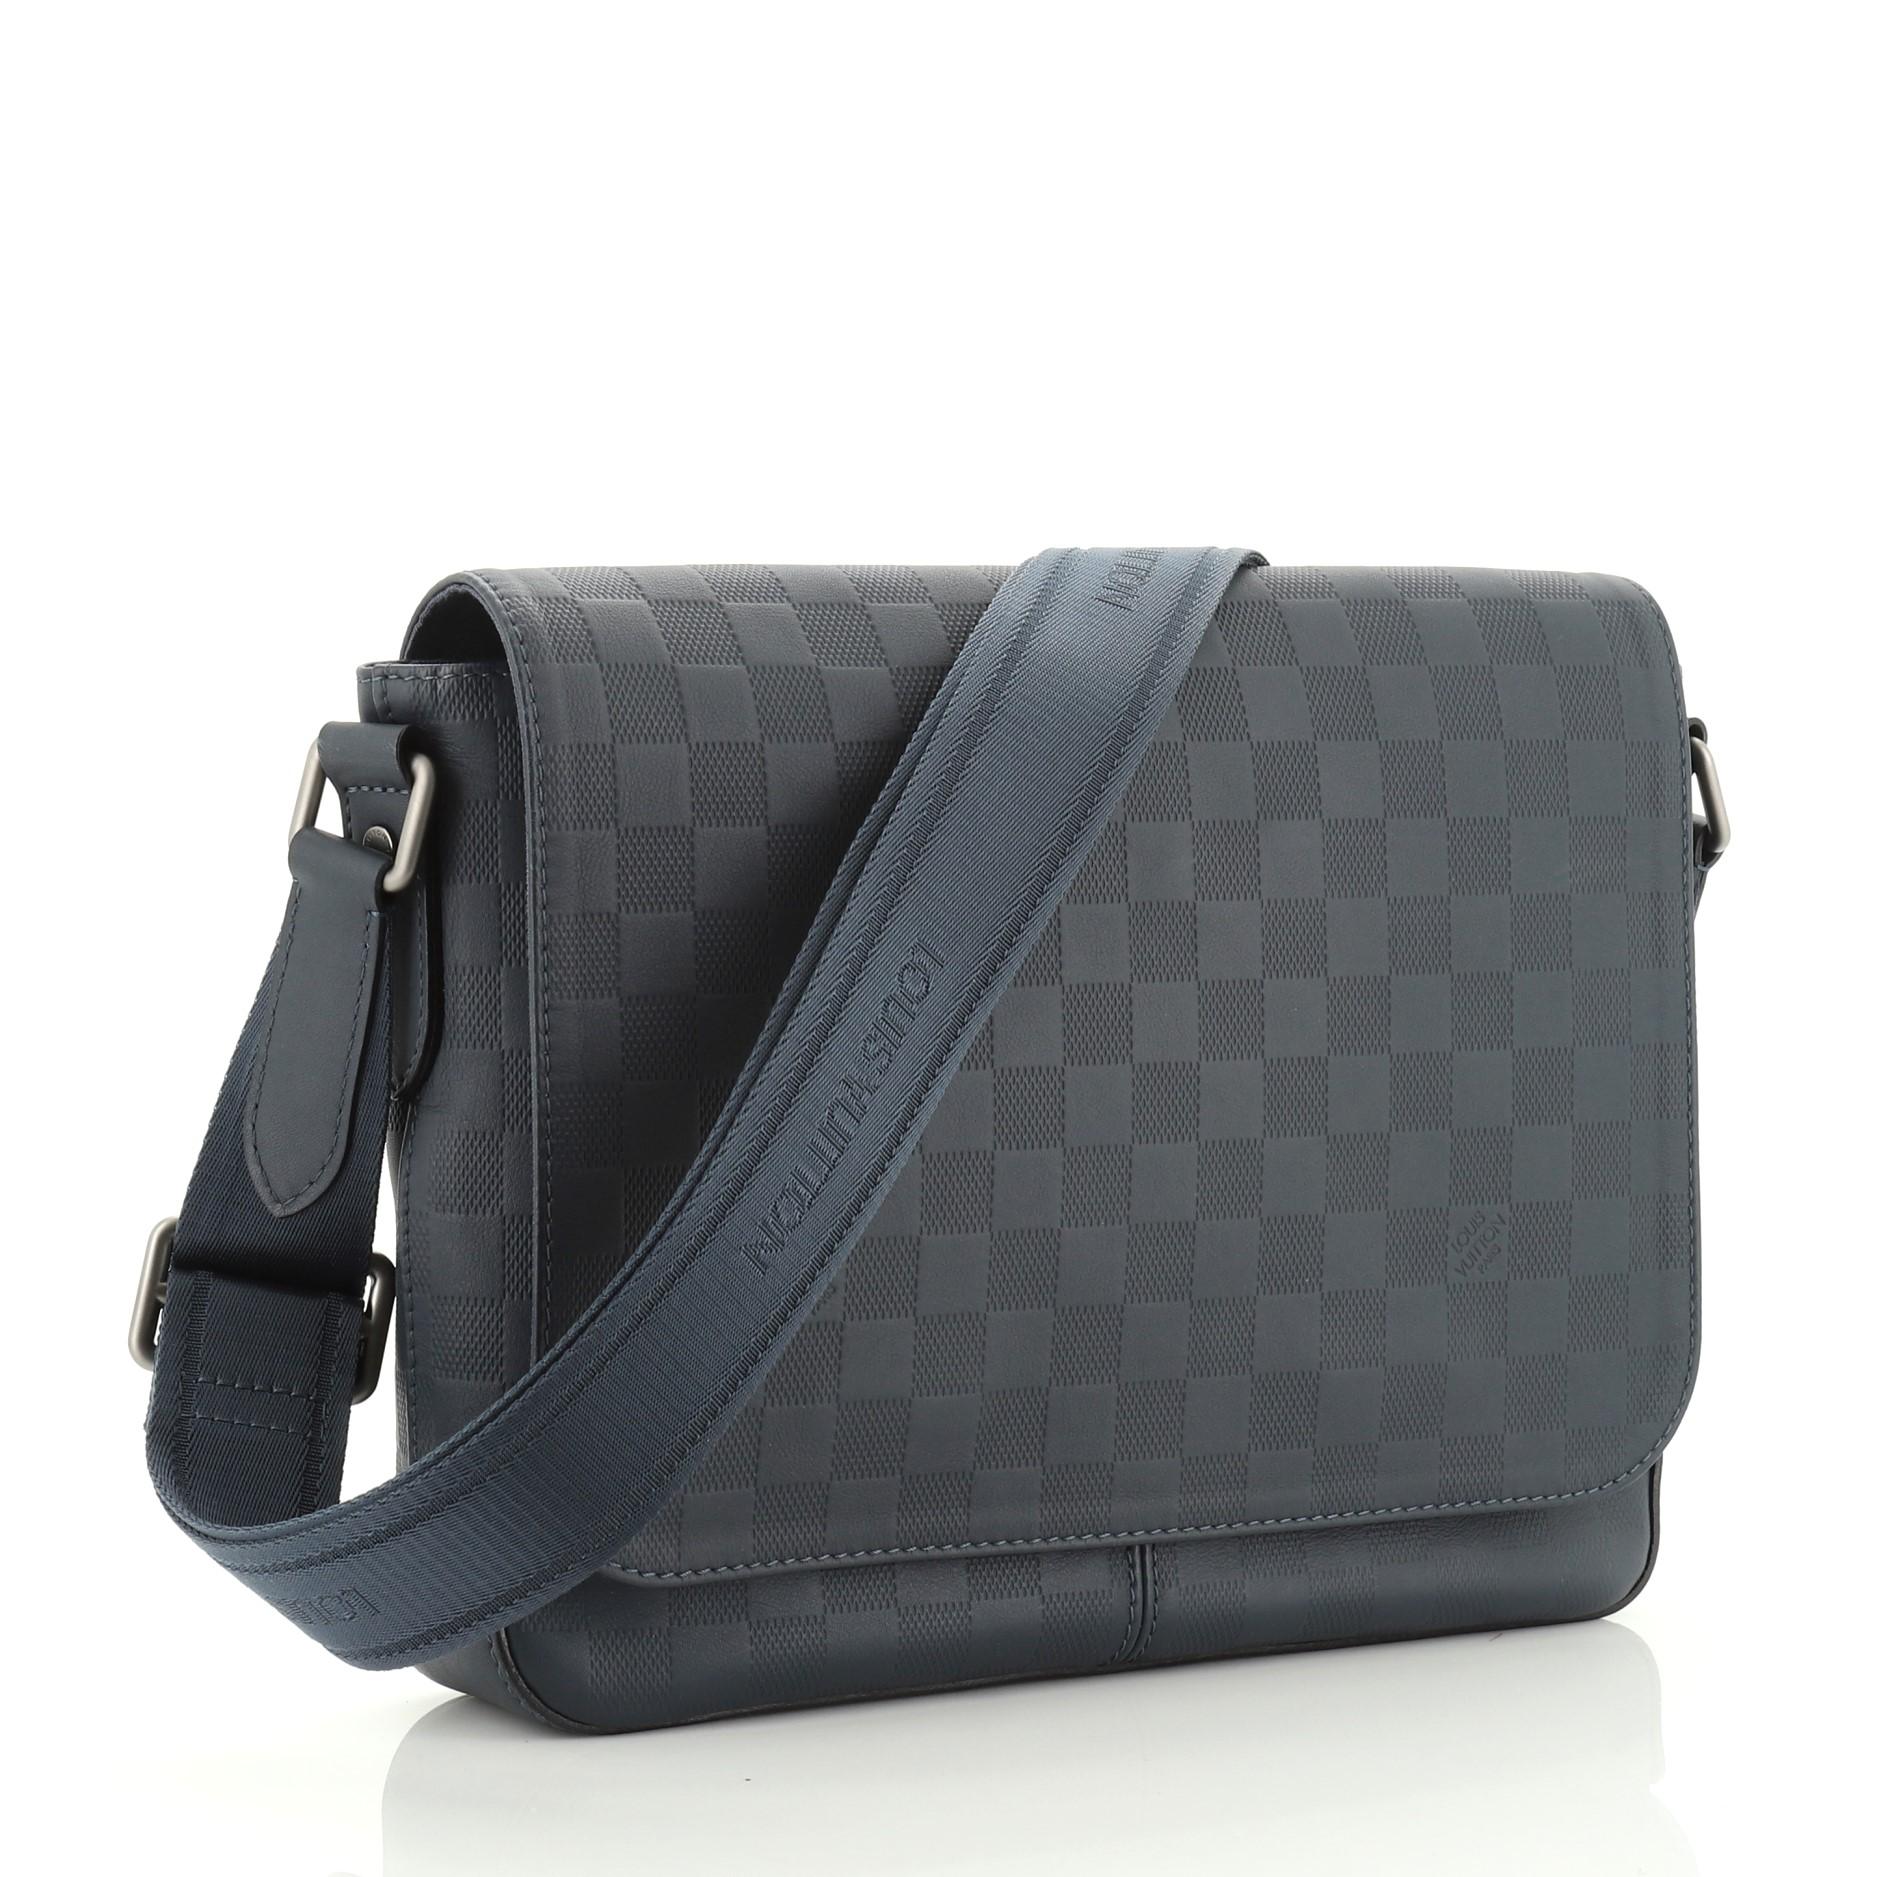 This Louis Vuitton District Messenger Bag Damier Infini Leather PM, crafted from damier infini leather, features an adjustable textile shoulder strap, exterior back zip pocket and matte gunmetal-tone hardware. Its flap opens to a blue fabric